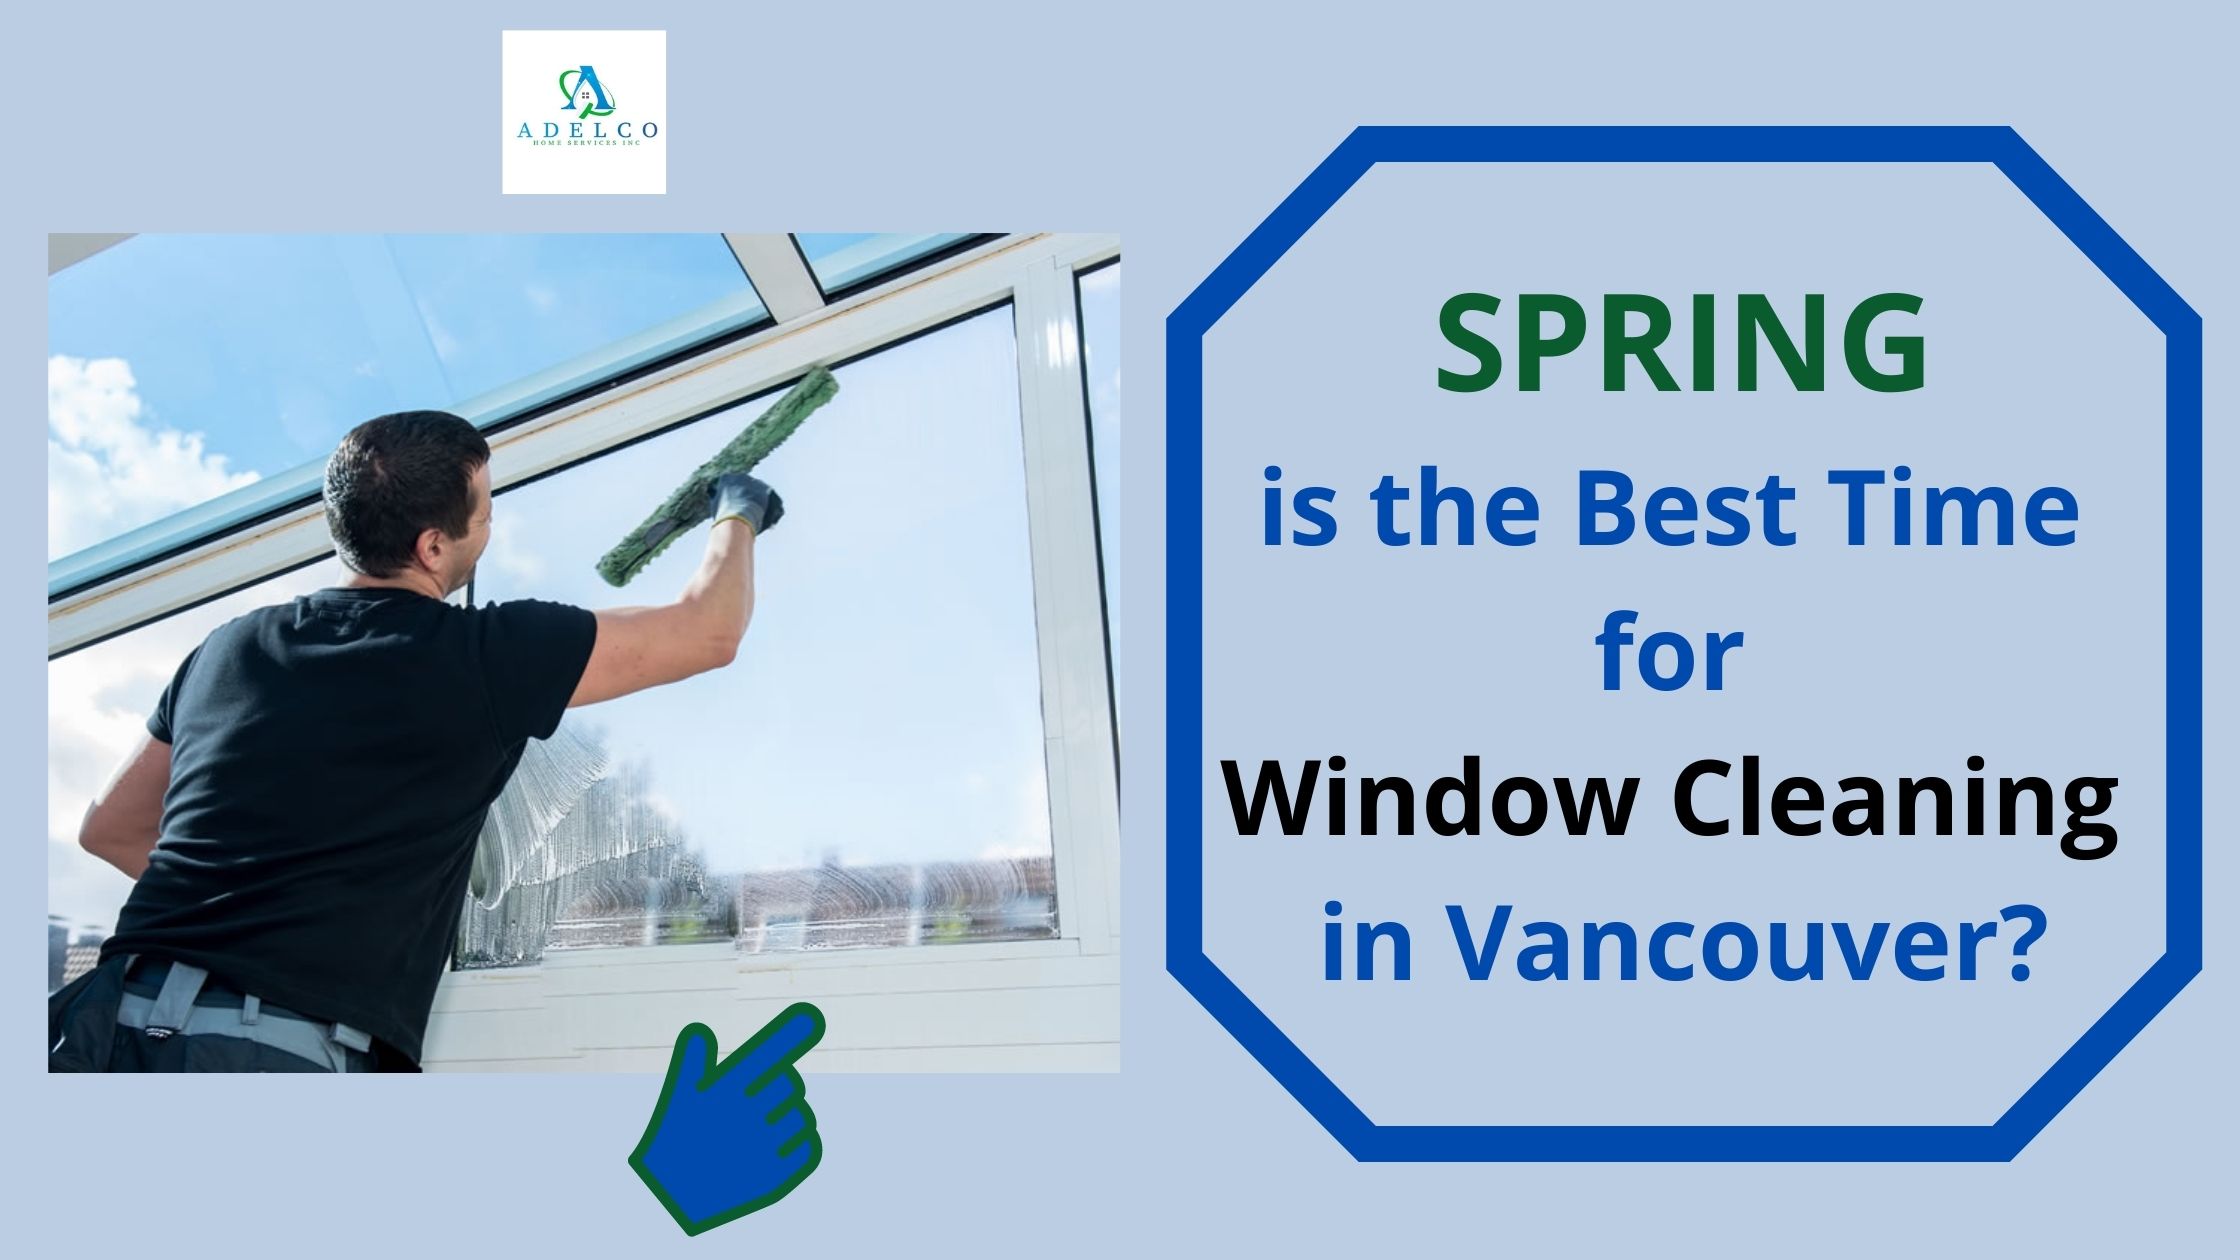 Spring is the best time for window cleaning in Vancouver